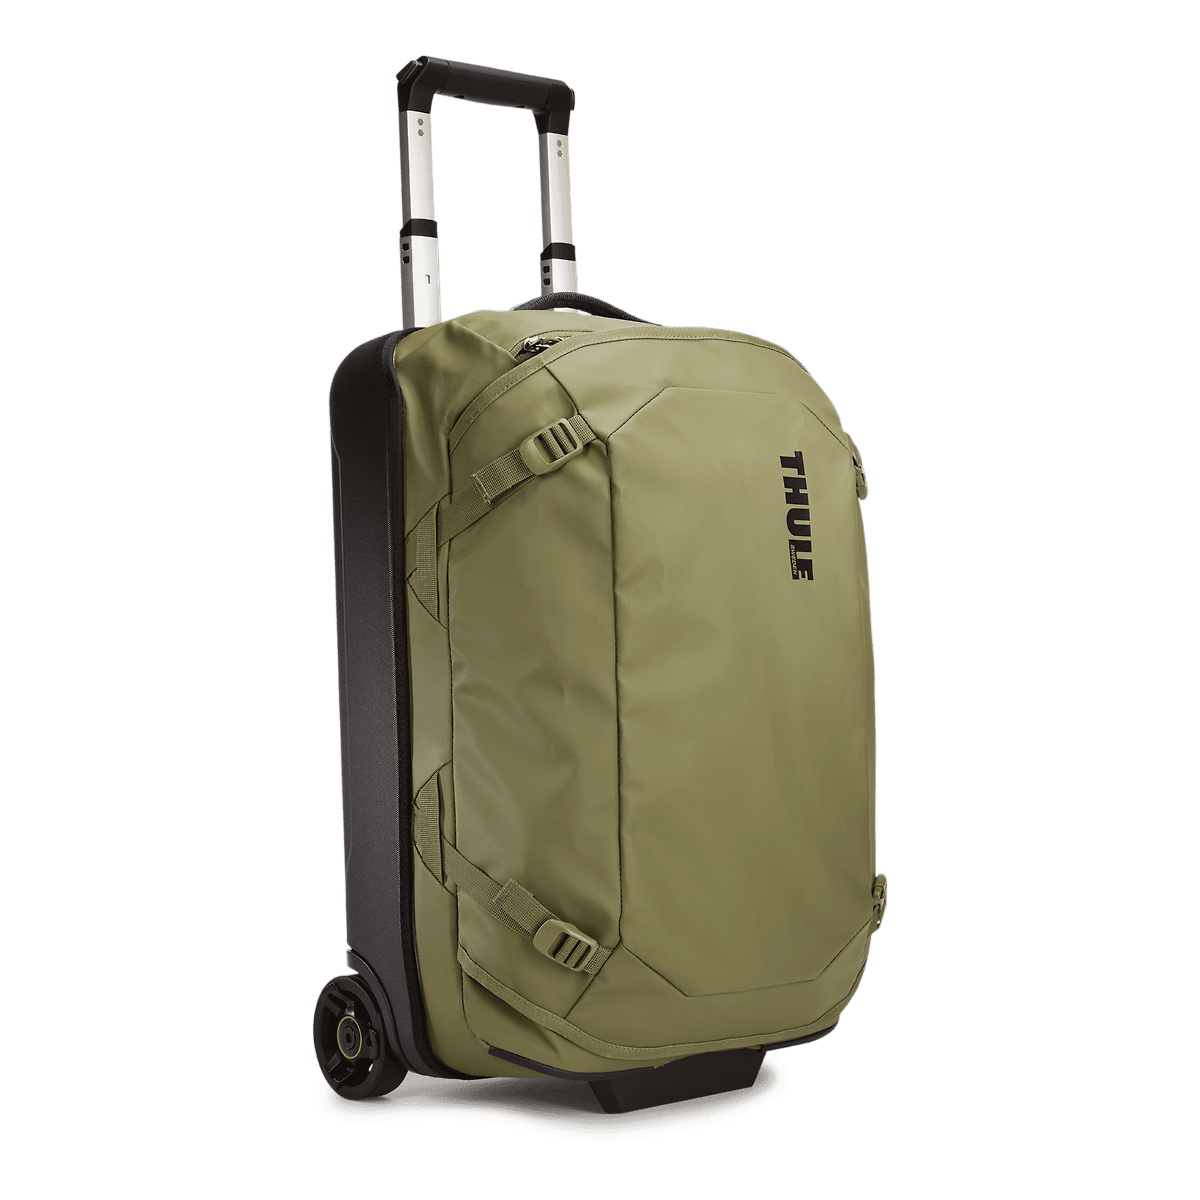 Thule Chasm carry on 2-wheeled Softsided duffel bag 40L